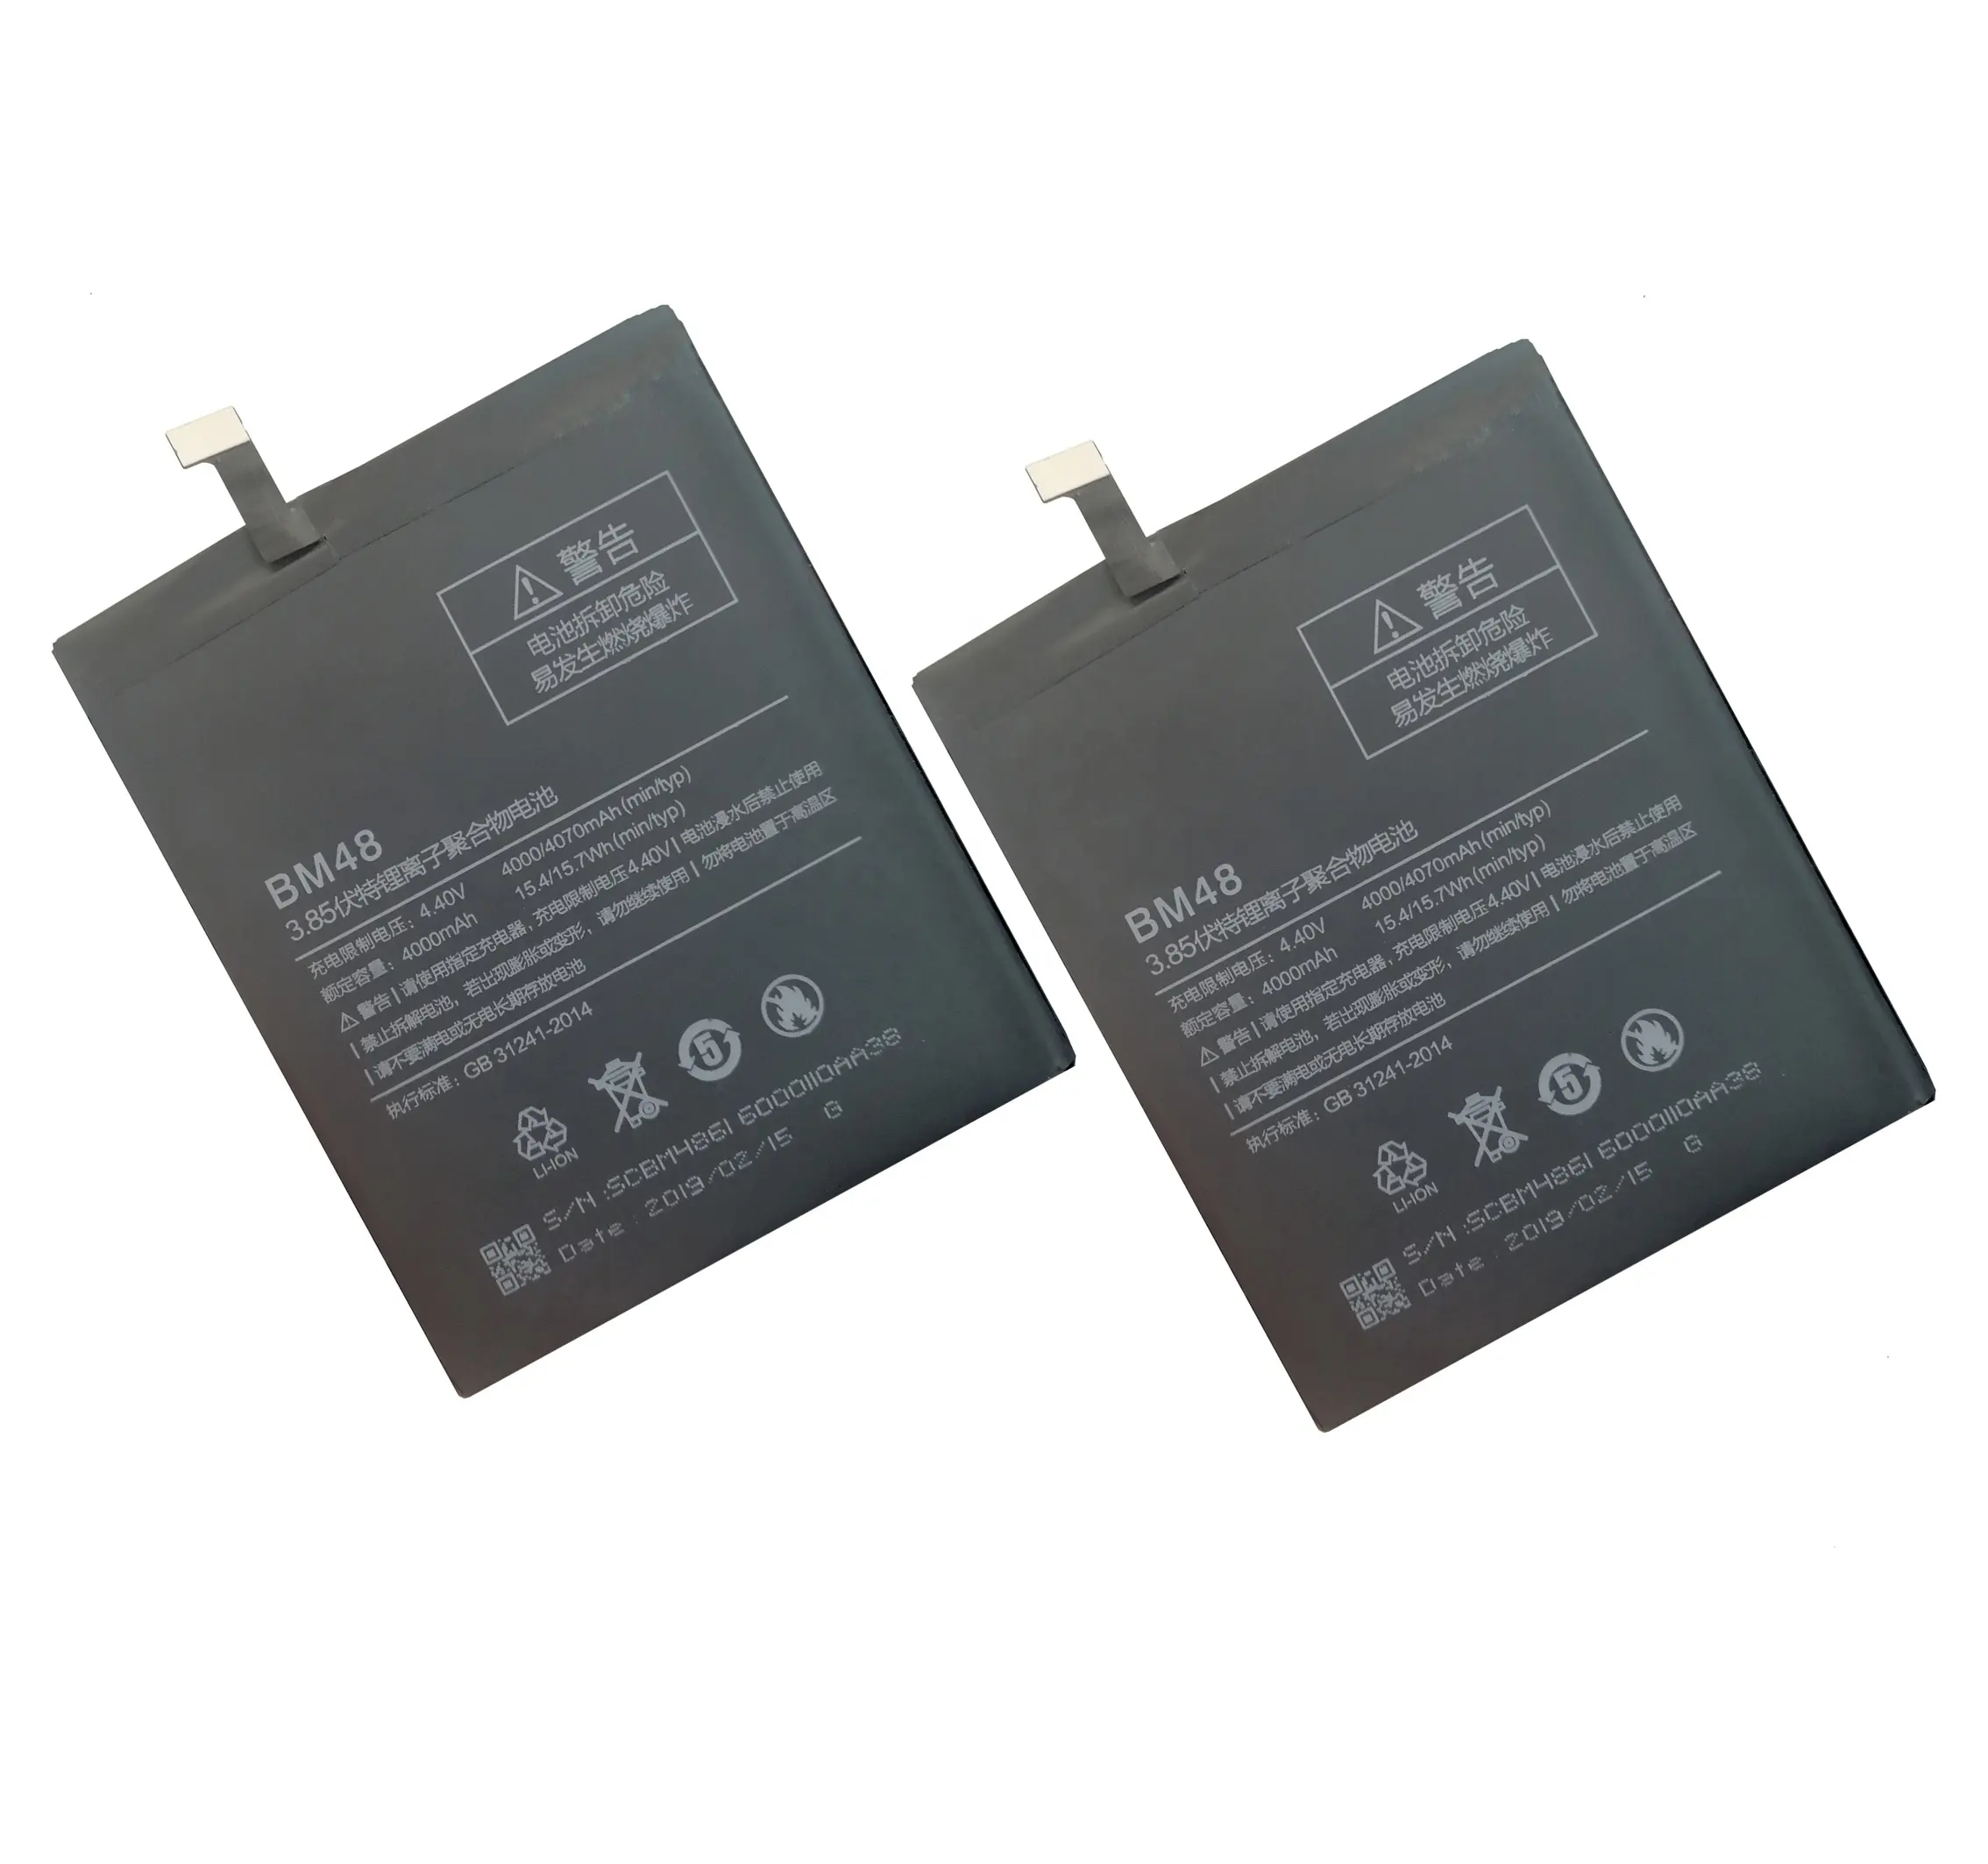 Compatible gb/t18287 2000 mobile phone battery lipo battery pack electric battery BM48 For Xiaomi Mi Note2 Note 2